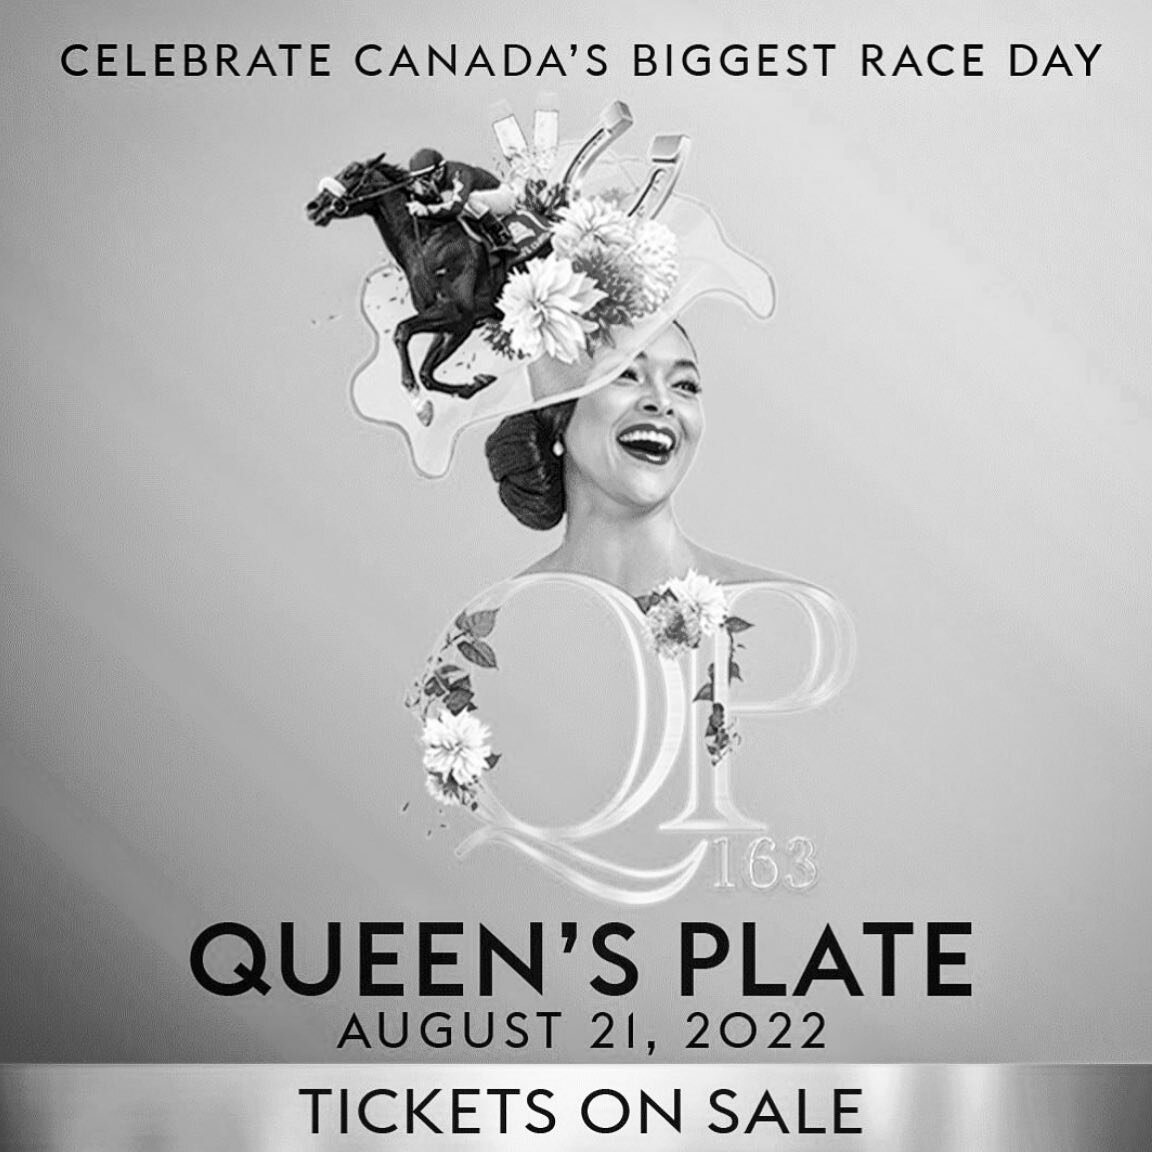 We are so thrilled to be back working on this year&rsquo;s Queen&rsquo;s Plate. In its 163rd year, the Queen&rsquo;s Plate is biggest day in Canadian Thoroughbred Racing. It is also one of Toronto&rsquo;s premiere social events of the summer. It&rsqu